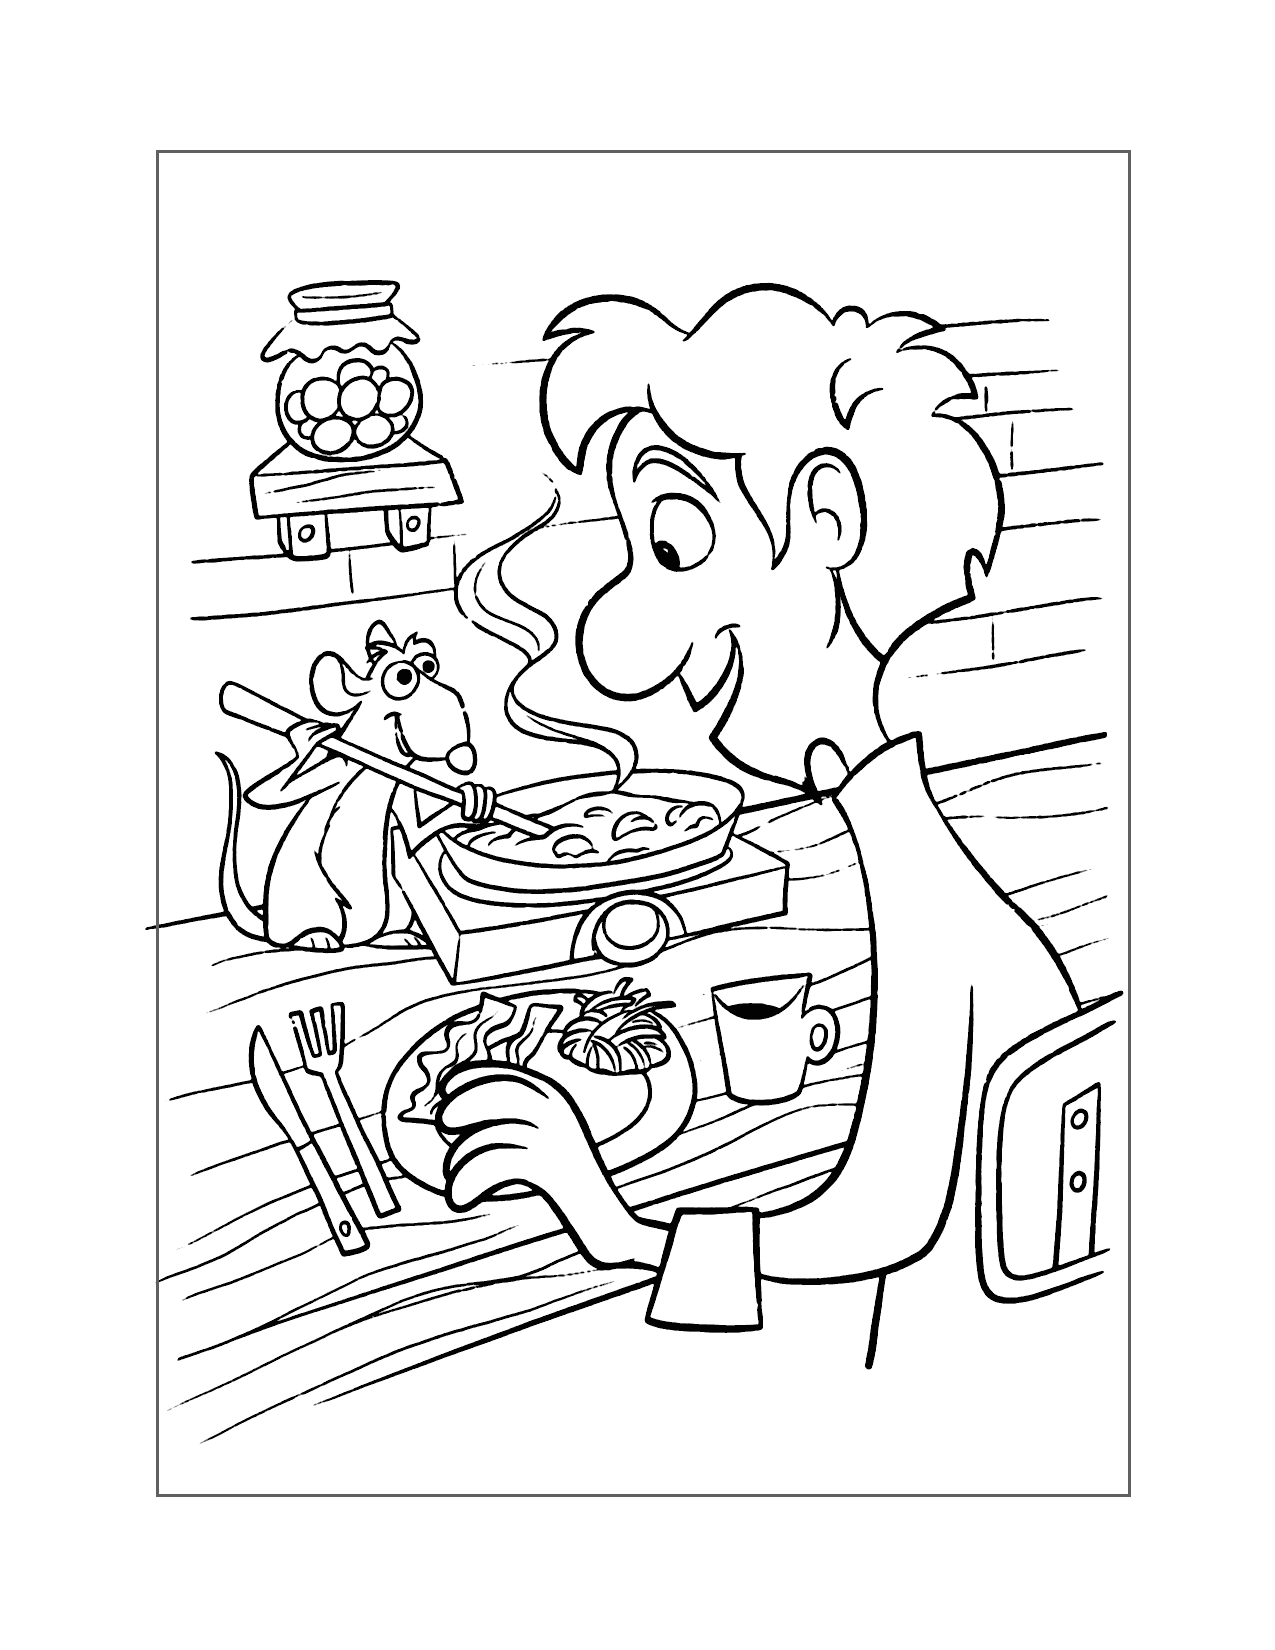 Remy Cooks Breakfast Ratatouille Coloring Page